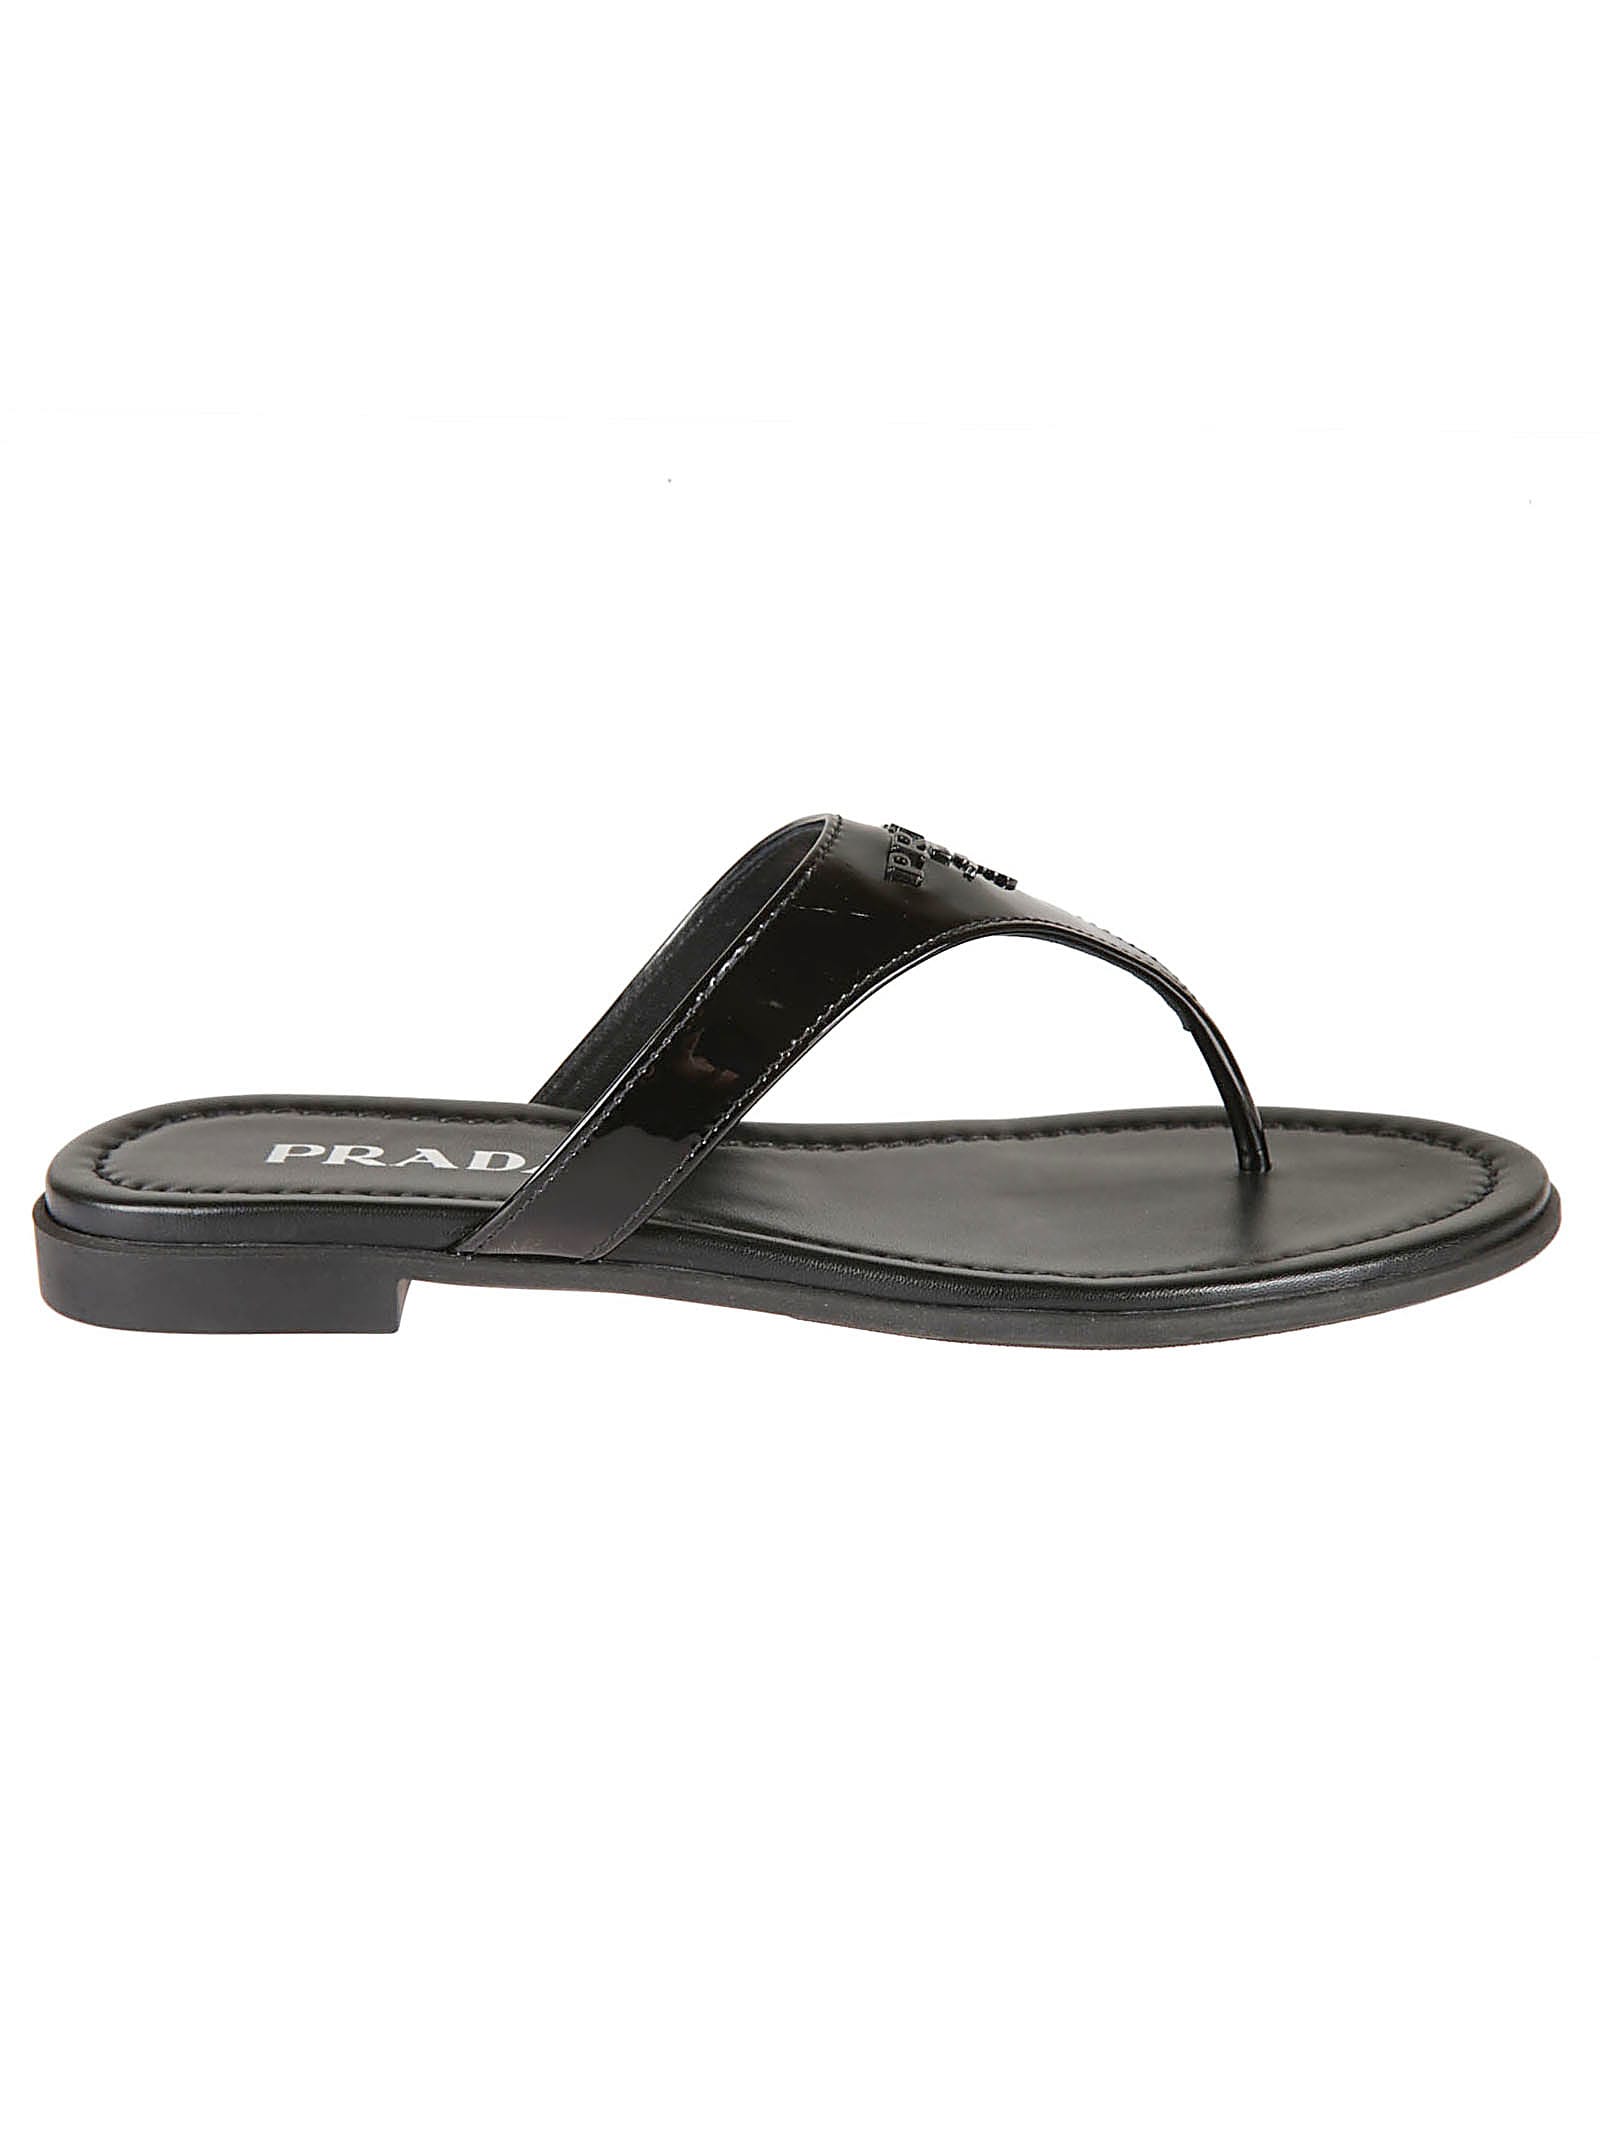 Buy Prada Classic Flat Sandals online, shop Prada shoes with free shipping